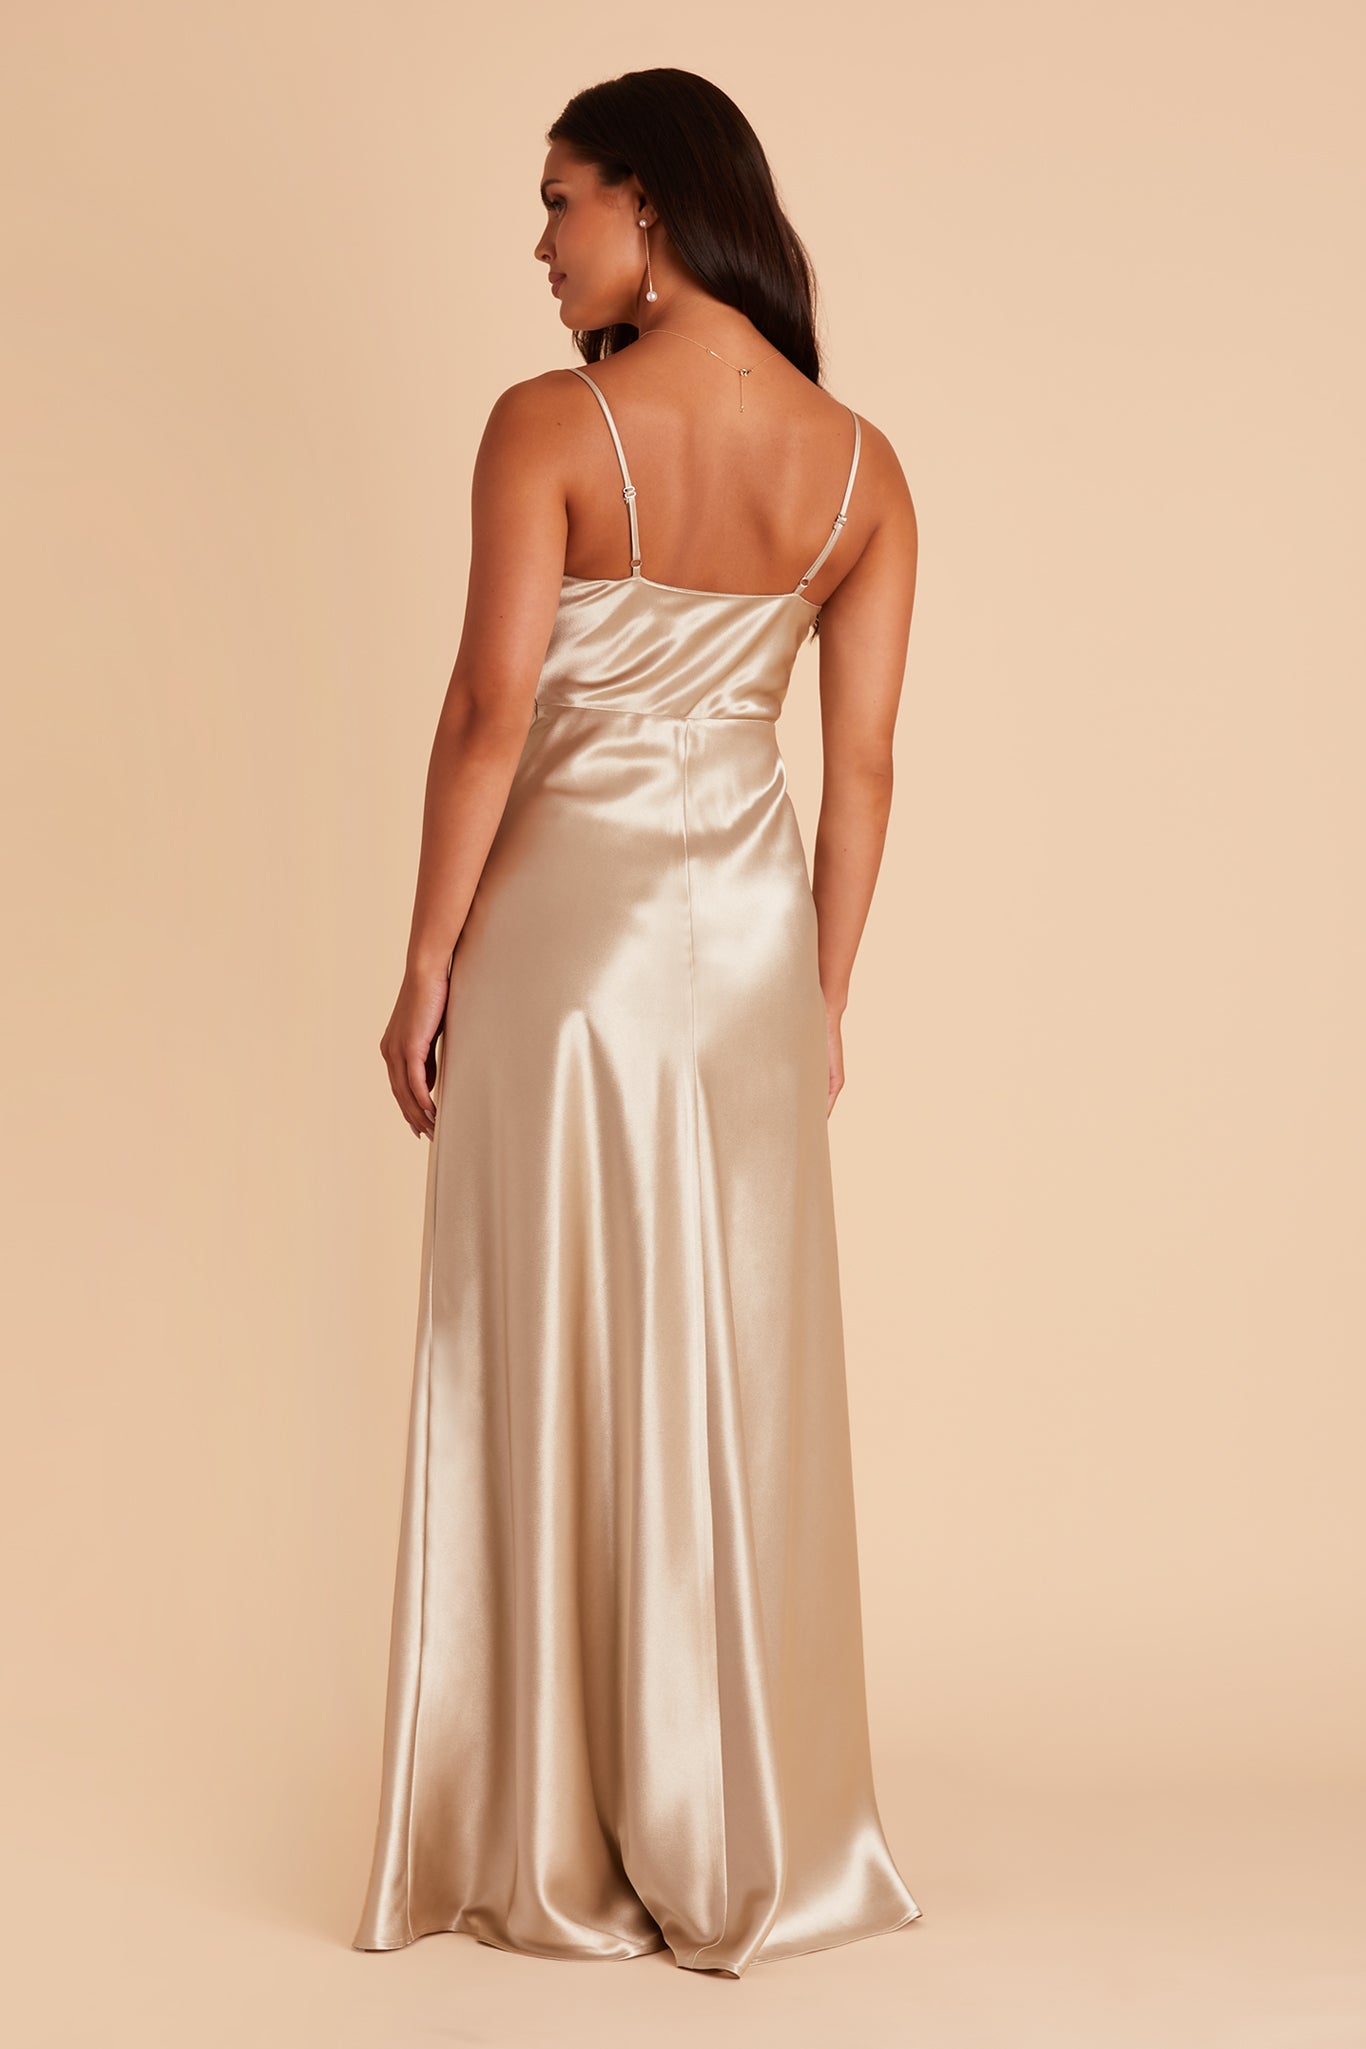 Back view of the Lisa Long Dress in neutral champagne satin shows the back of the dress with adjustable spaghetti straps and a smooth fit in the bodice and waist that attach to a full-length skirt.  